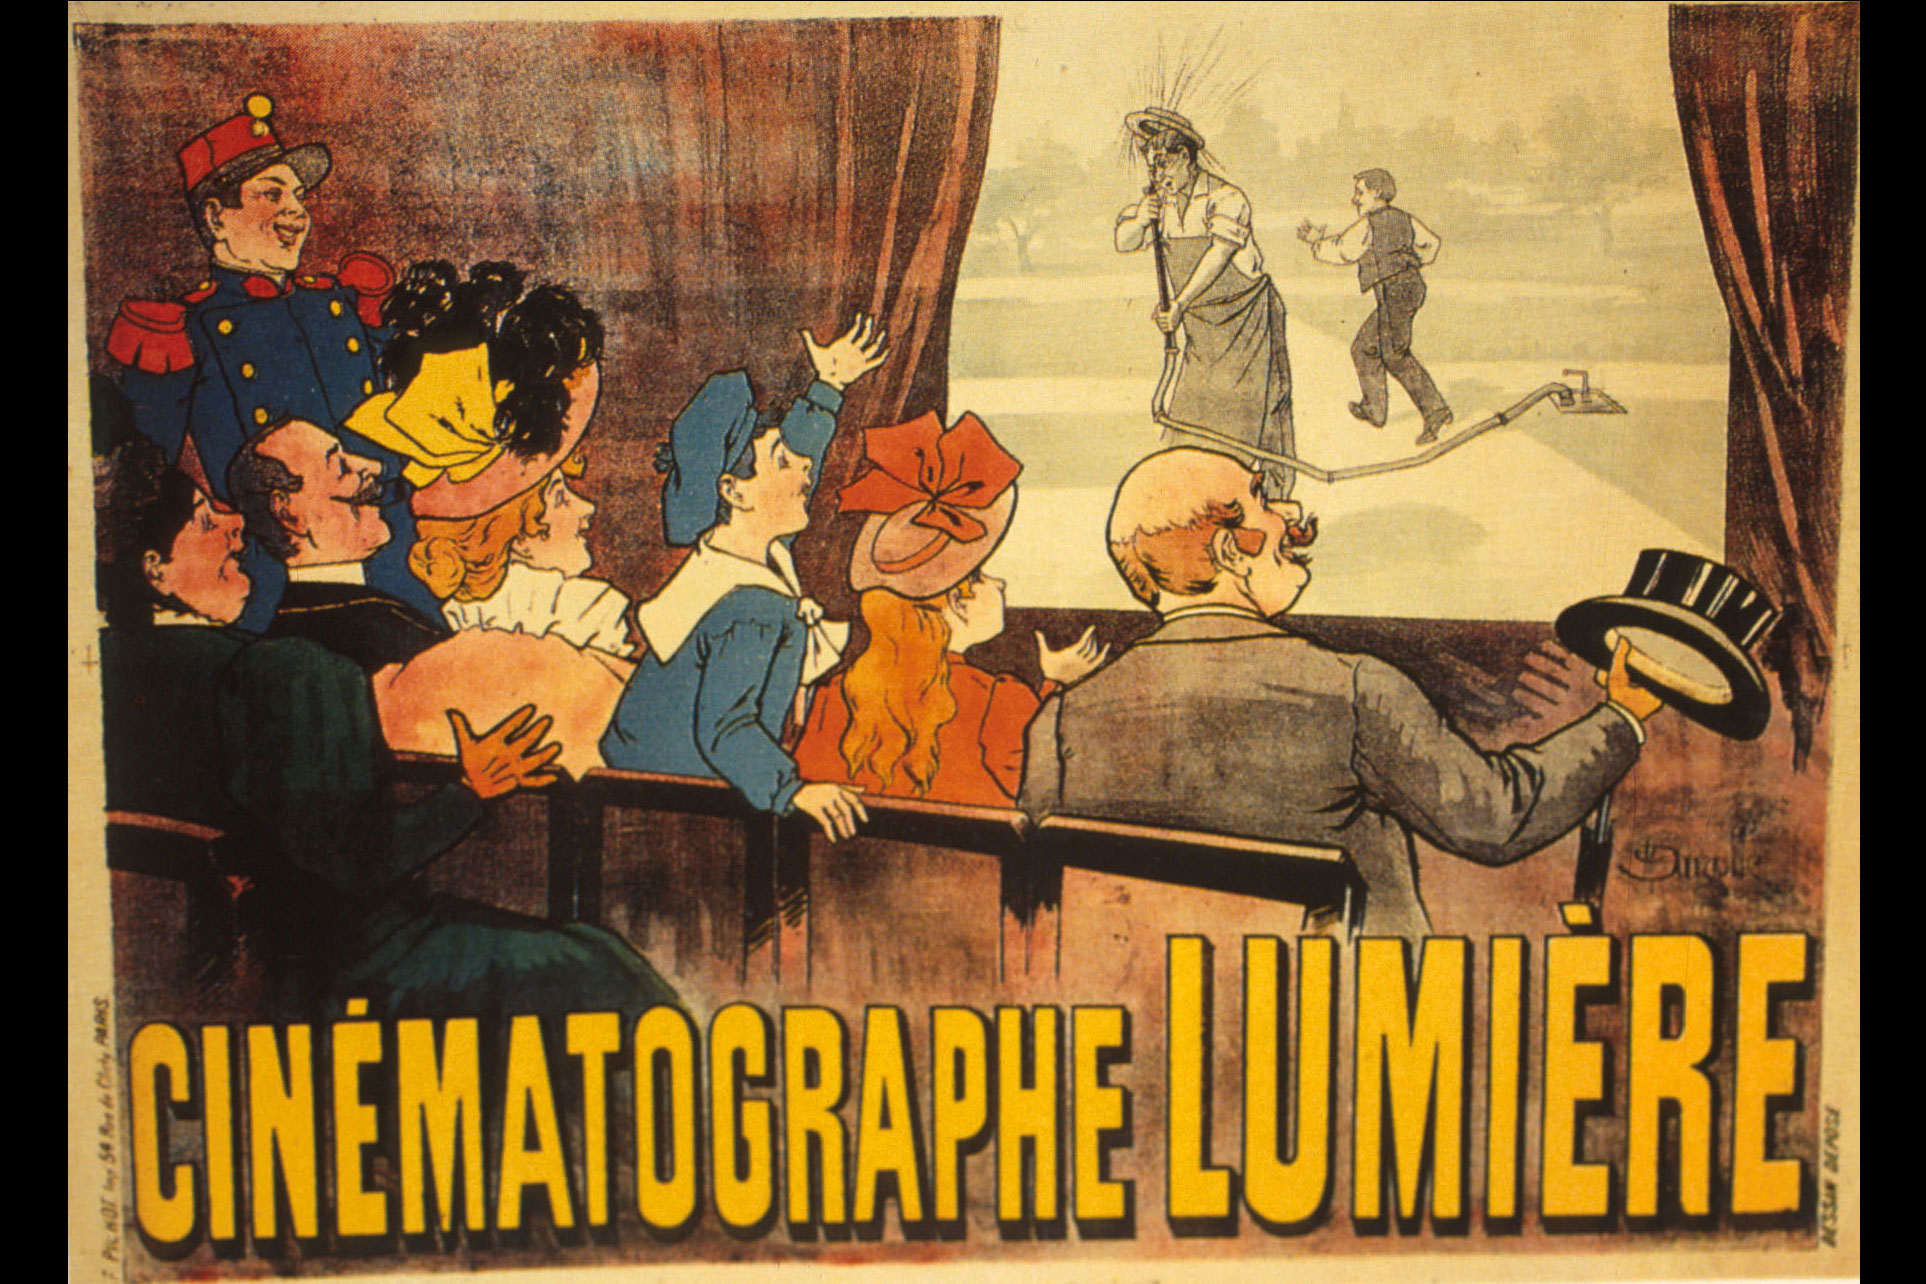 1800's hand drawn film poster showing a crowd dressed in period clothing cheering at a movie screen. 